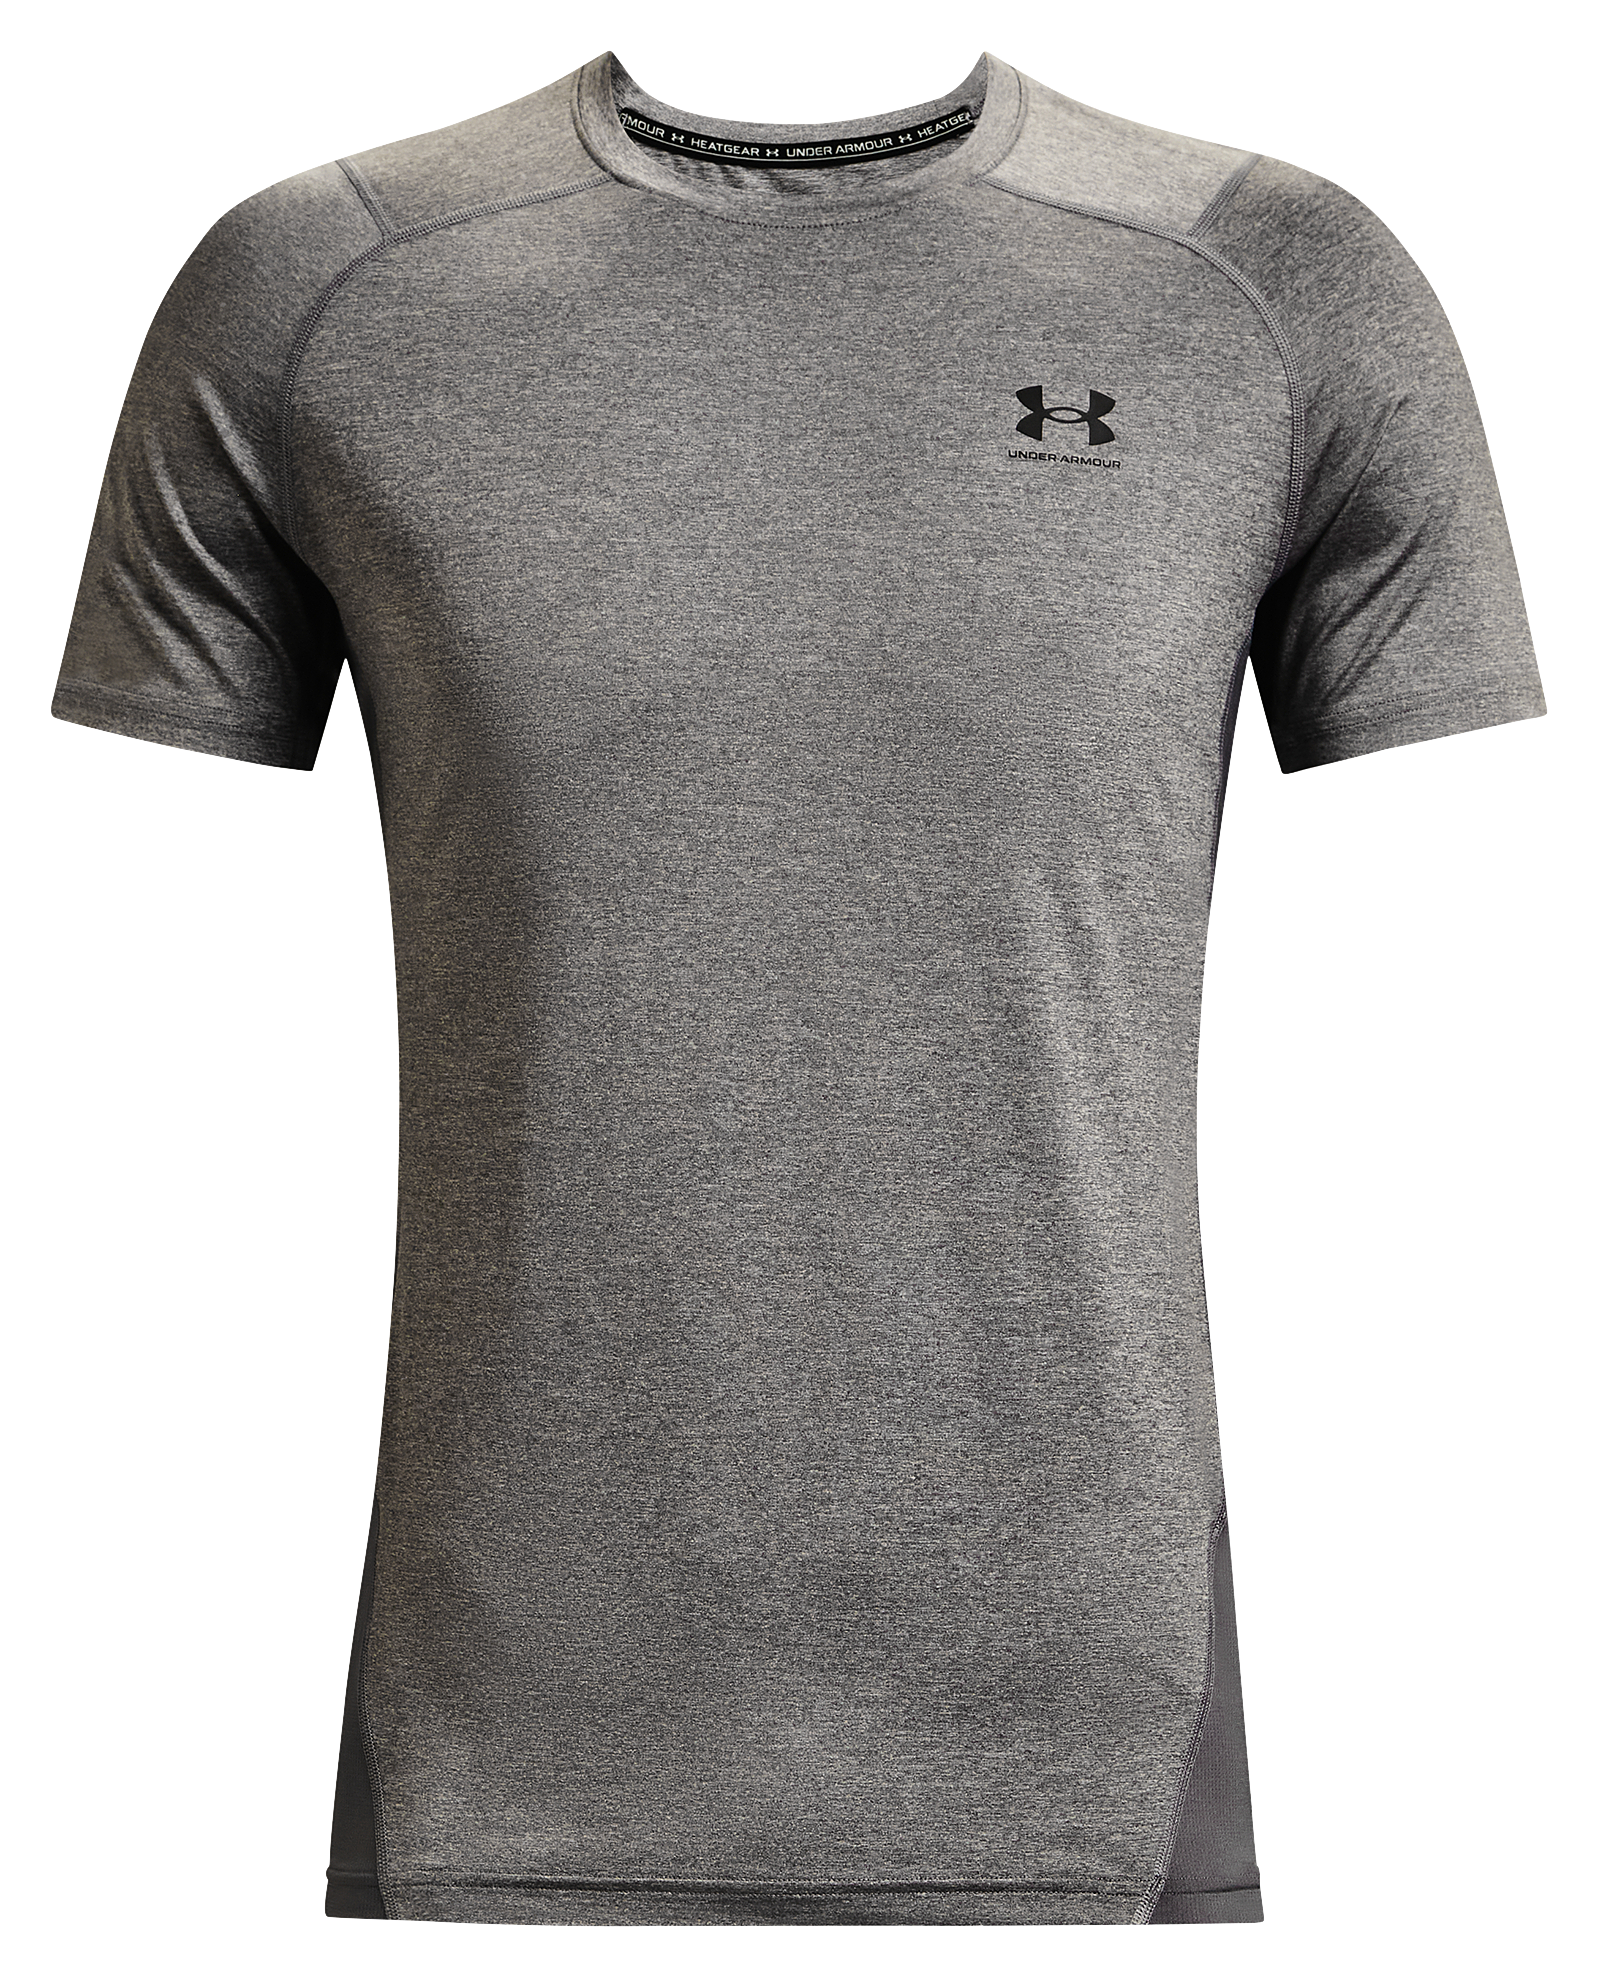 Under Armour HeatGear Fitted Short-Sleeve T-Shirt for Men - Carbon Heather - ST